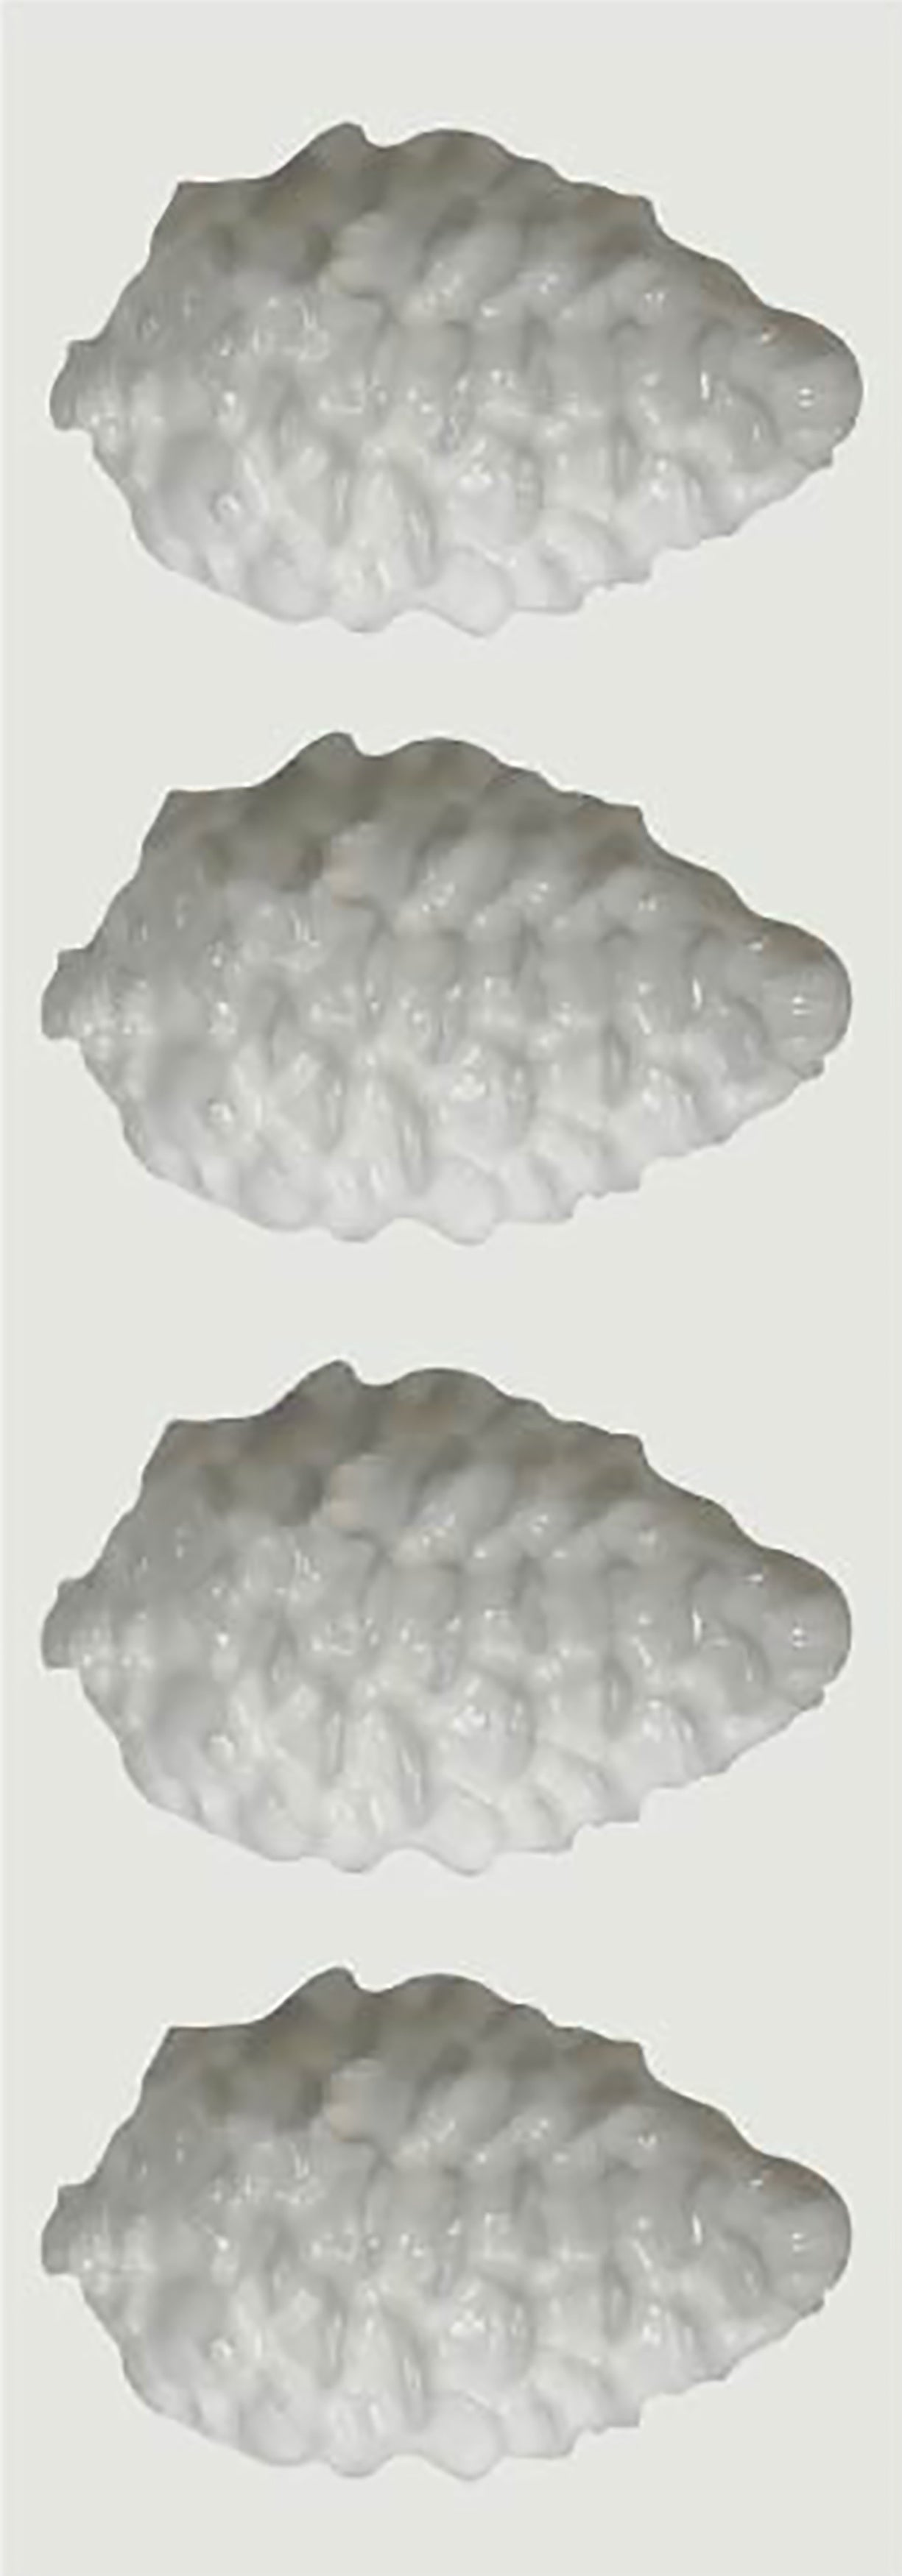 We R Memory Keepers SUDS Soap Maker Mold-Pine Cone